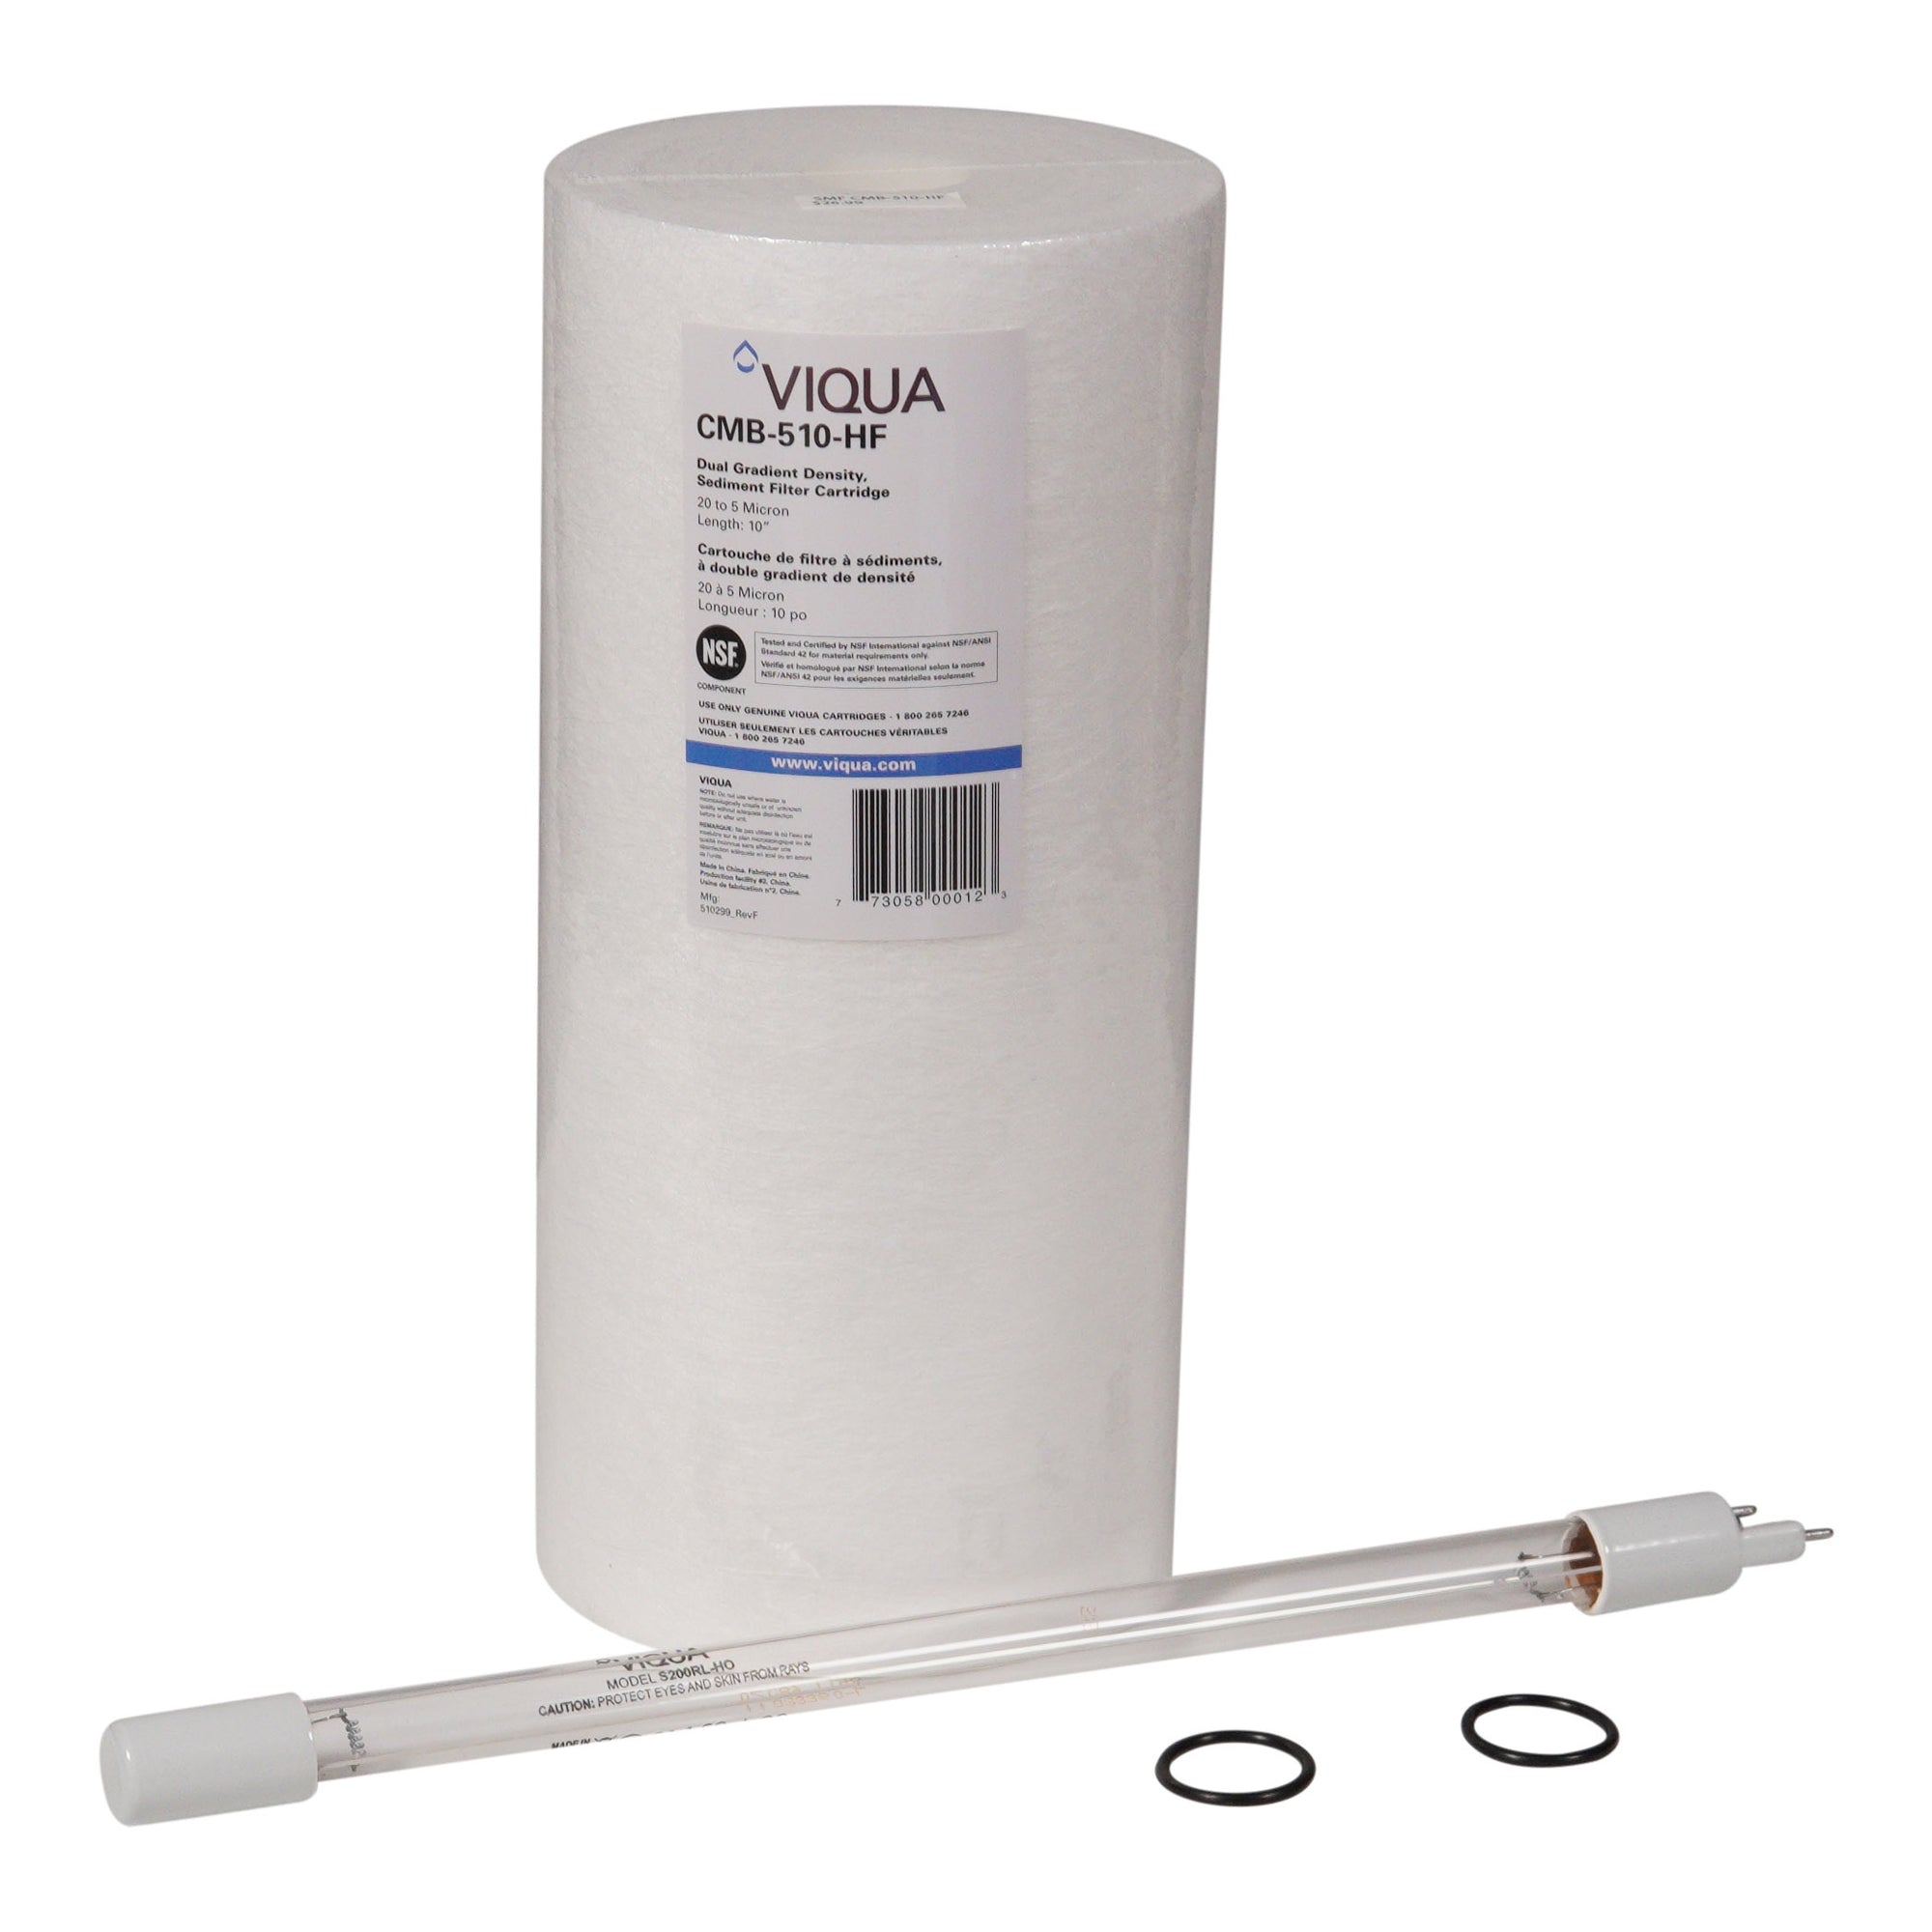 Viqua VH200-F10 Genuine Replacement UV Lamp and Filter 